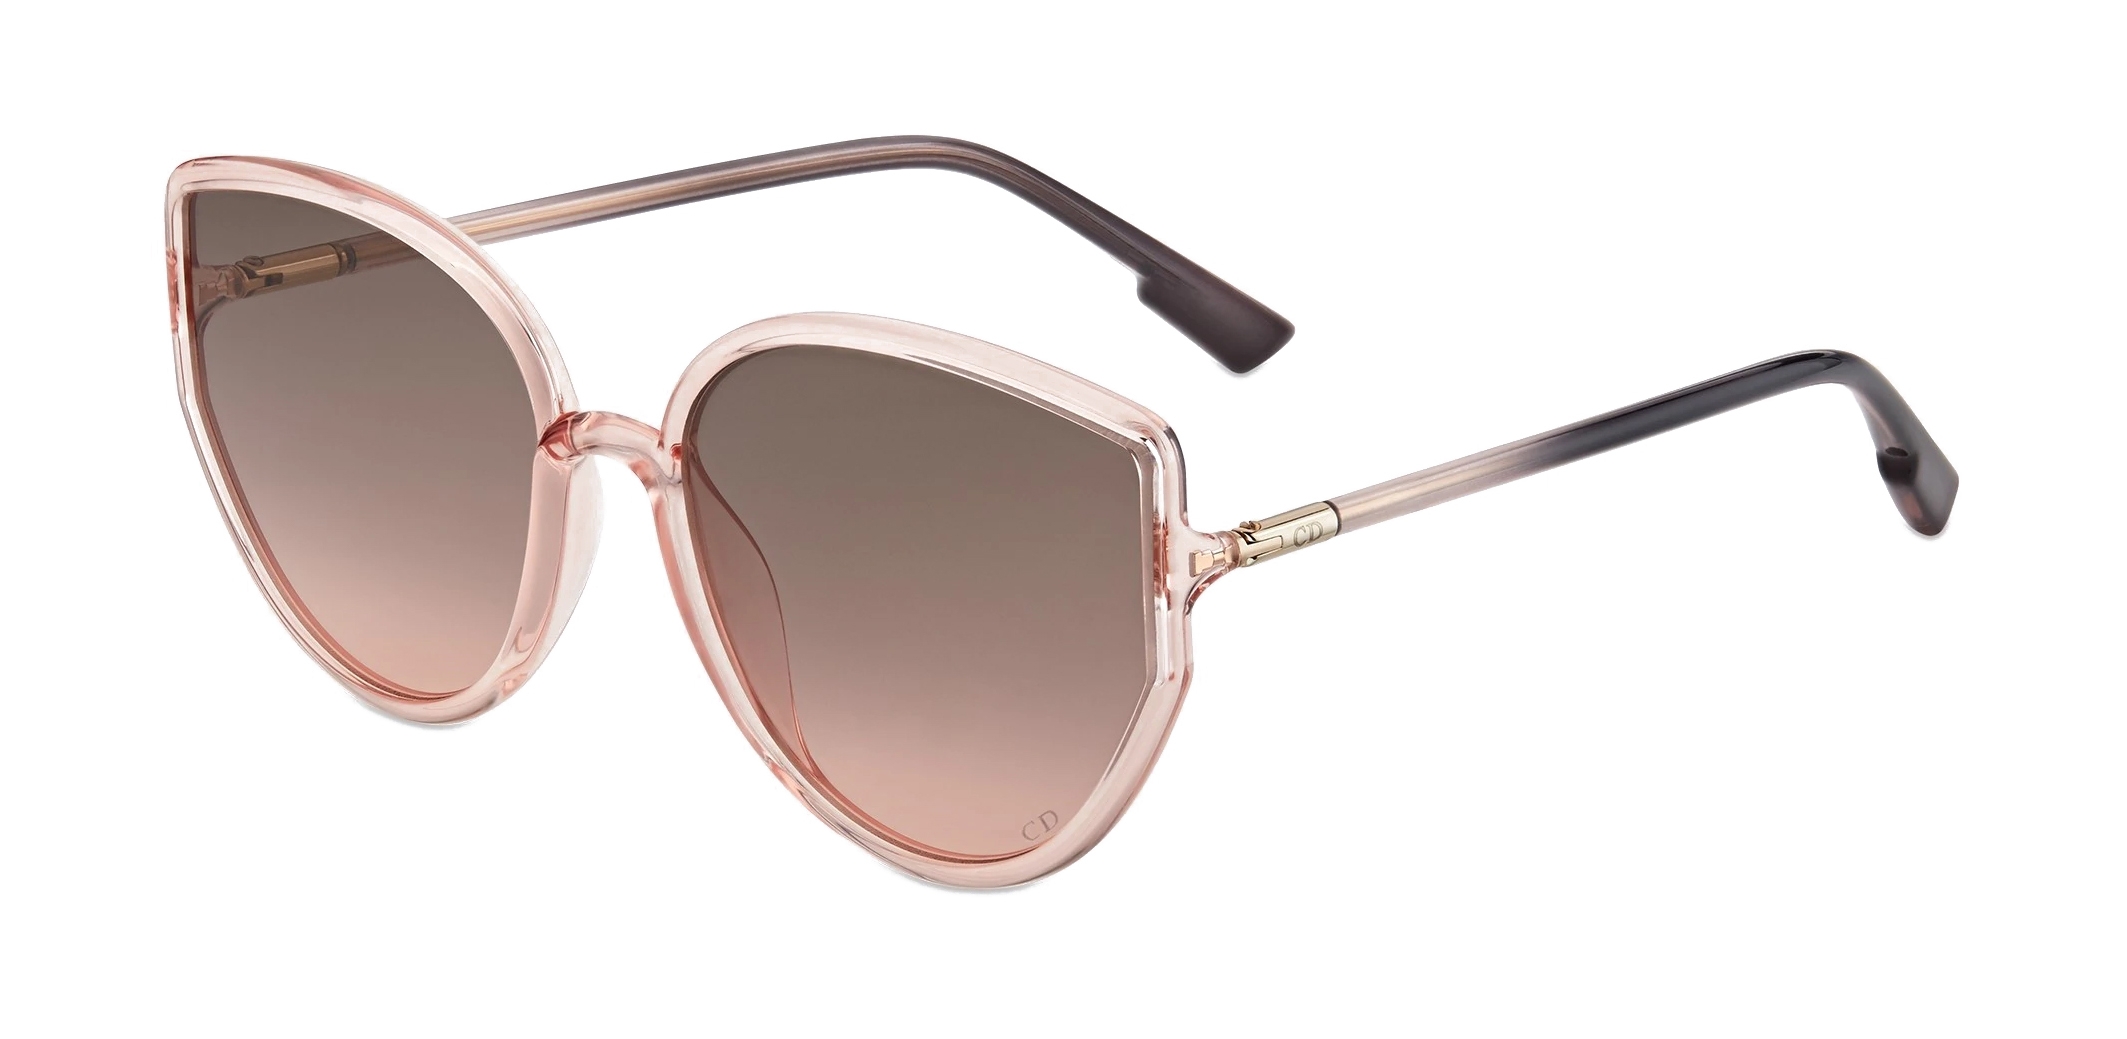 Dior Eclat Grey Marble Pink Mirror Lens Sunglasses  I MISS YOU VINTAGE